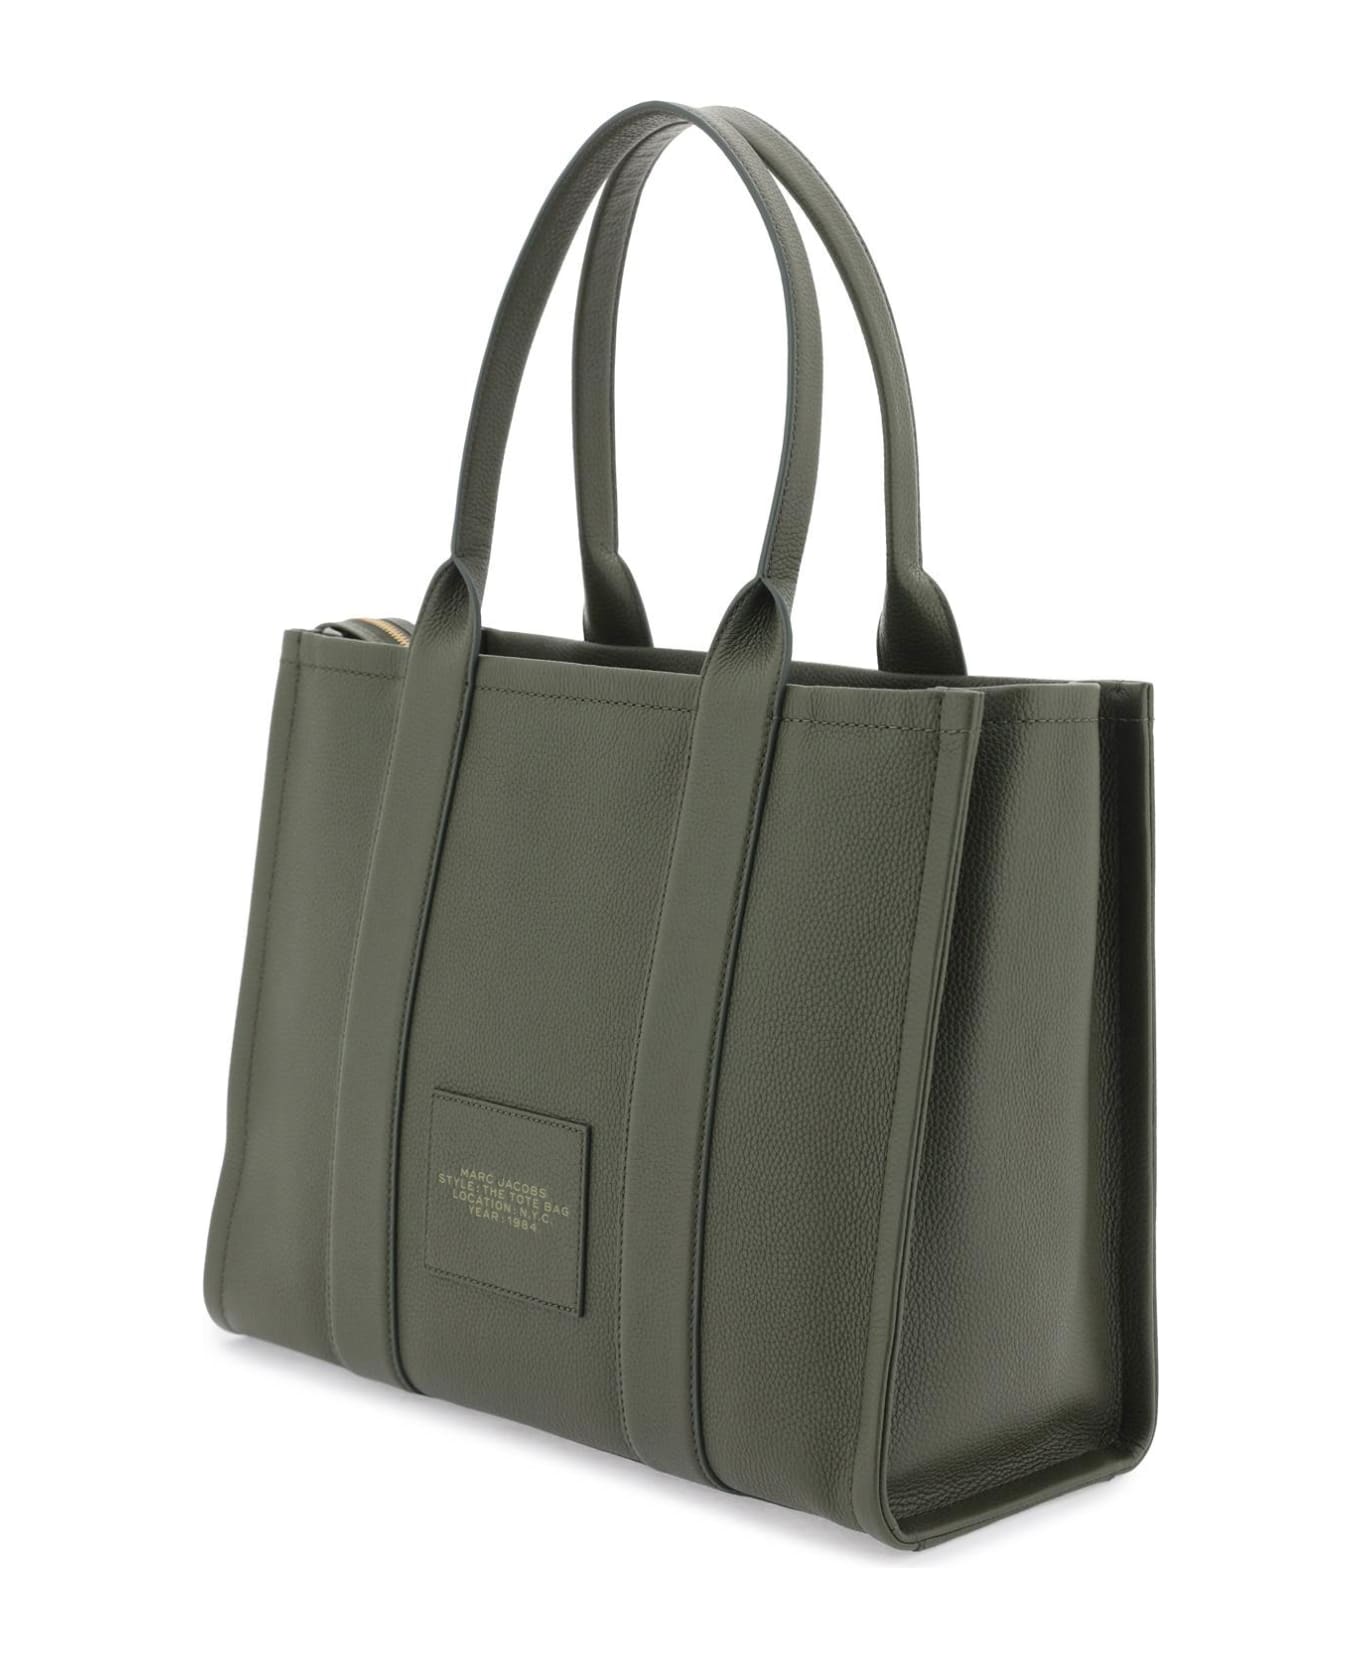 Marc Jacobs The Leather Large Tote Bag - FOREST (Green) トートバッグ